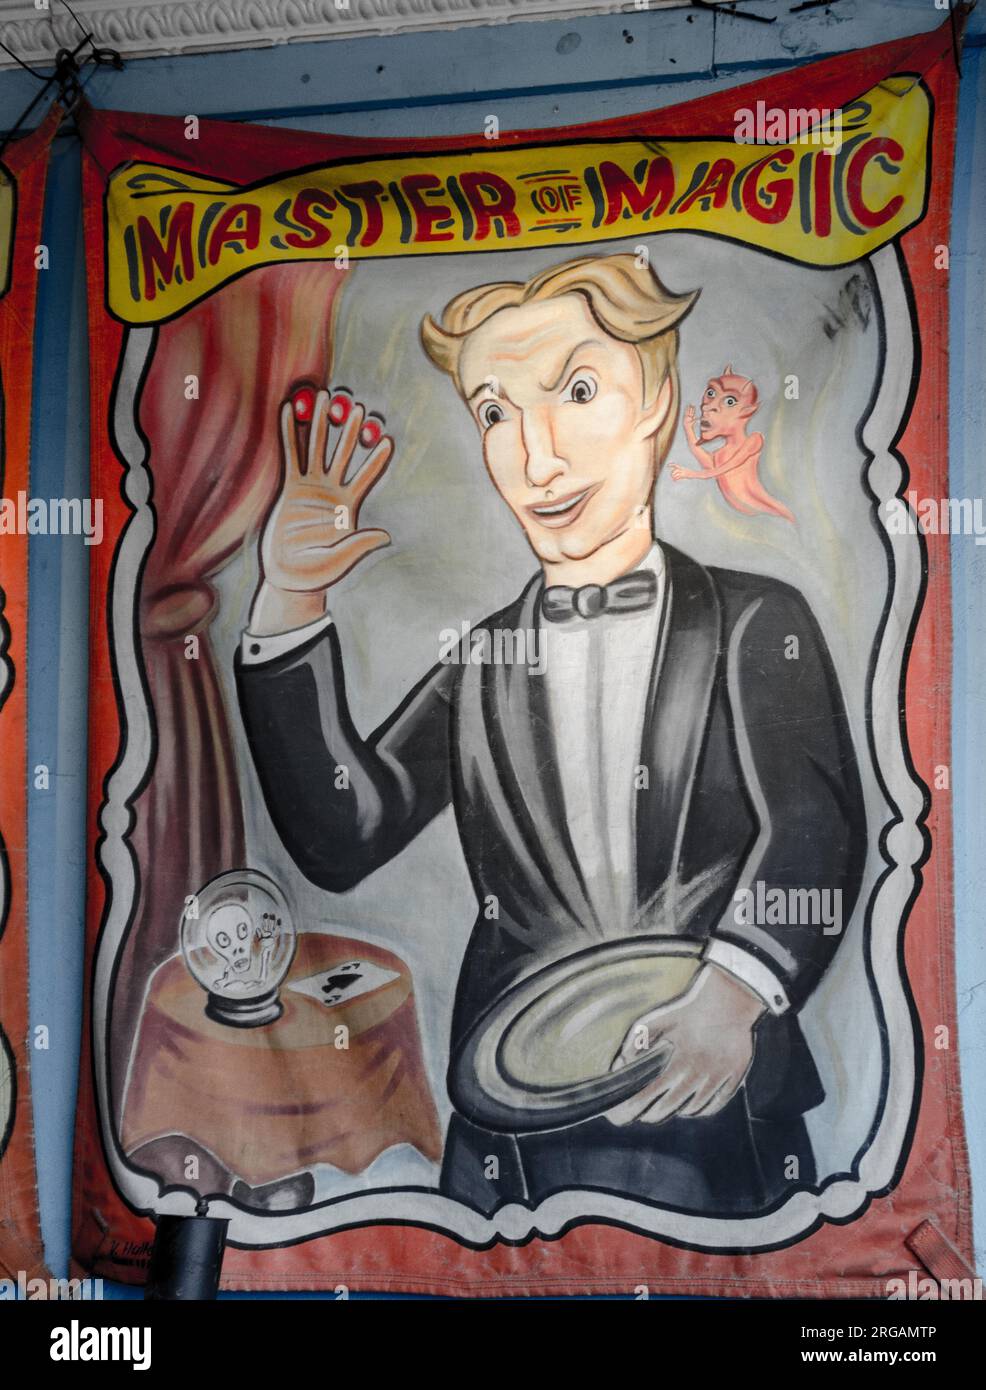 Sign advertising the Magician at Coney Island, New York Stock Photo